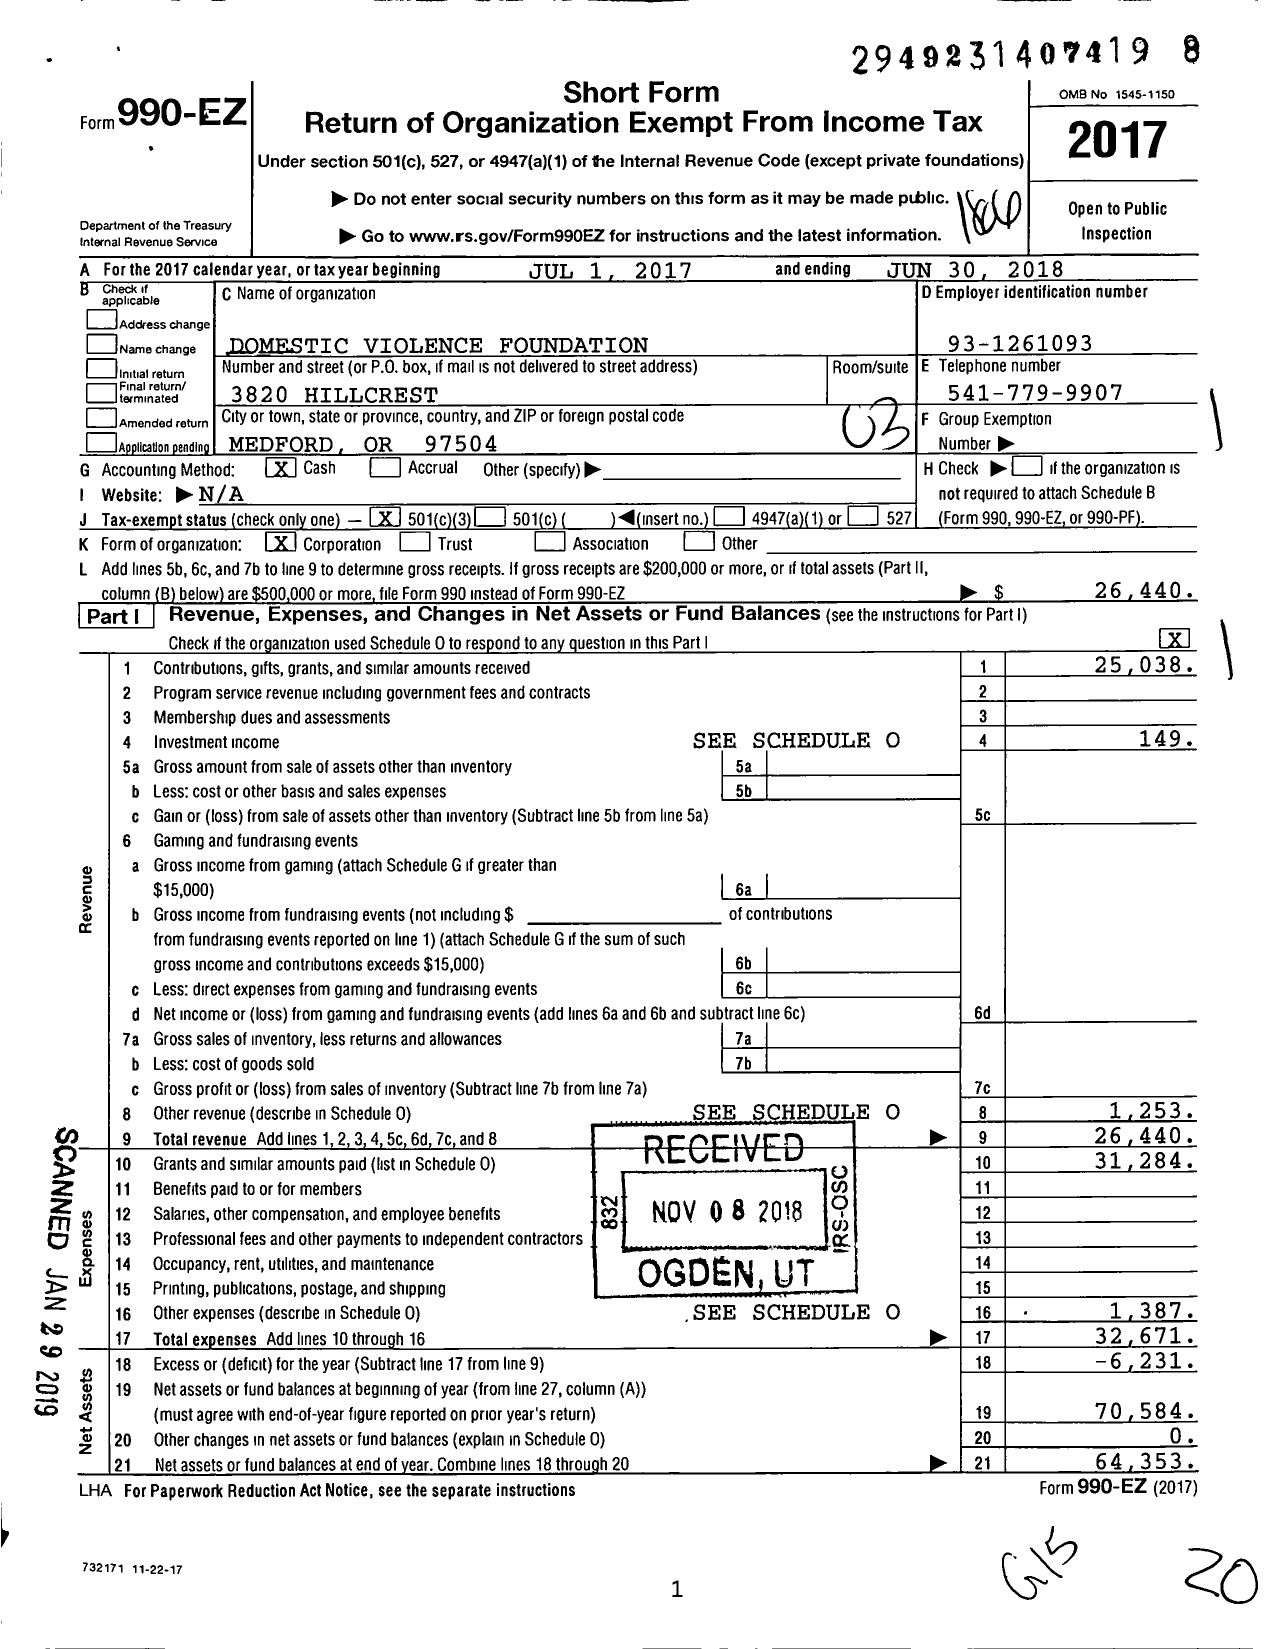 Image of first page of 2017 Form 990EZ for Domestic Violence Foundation